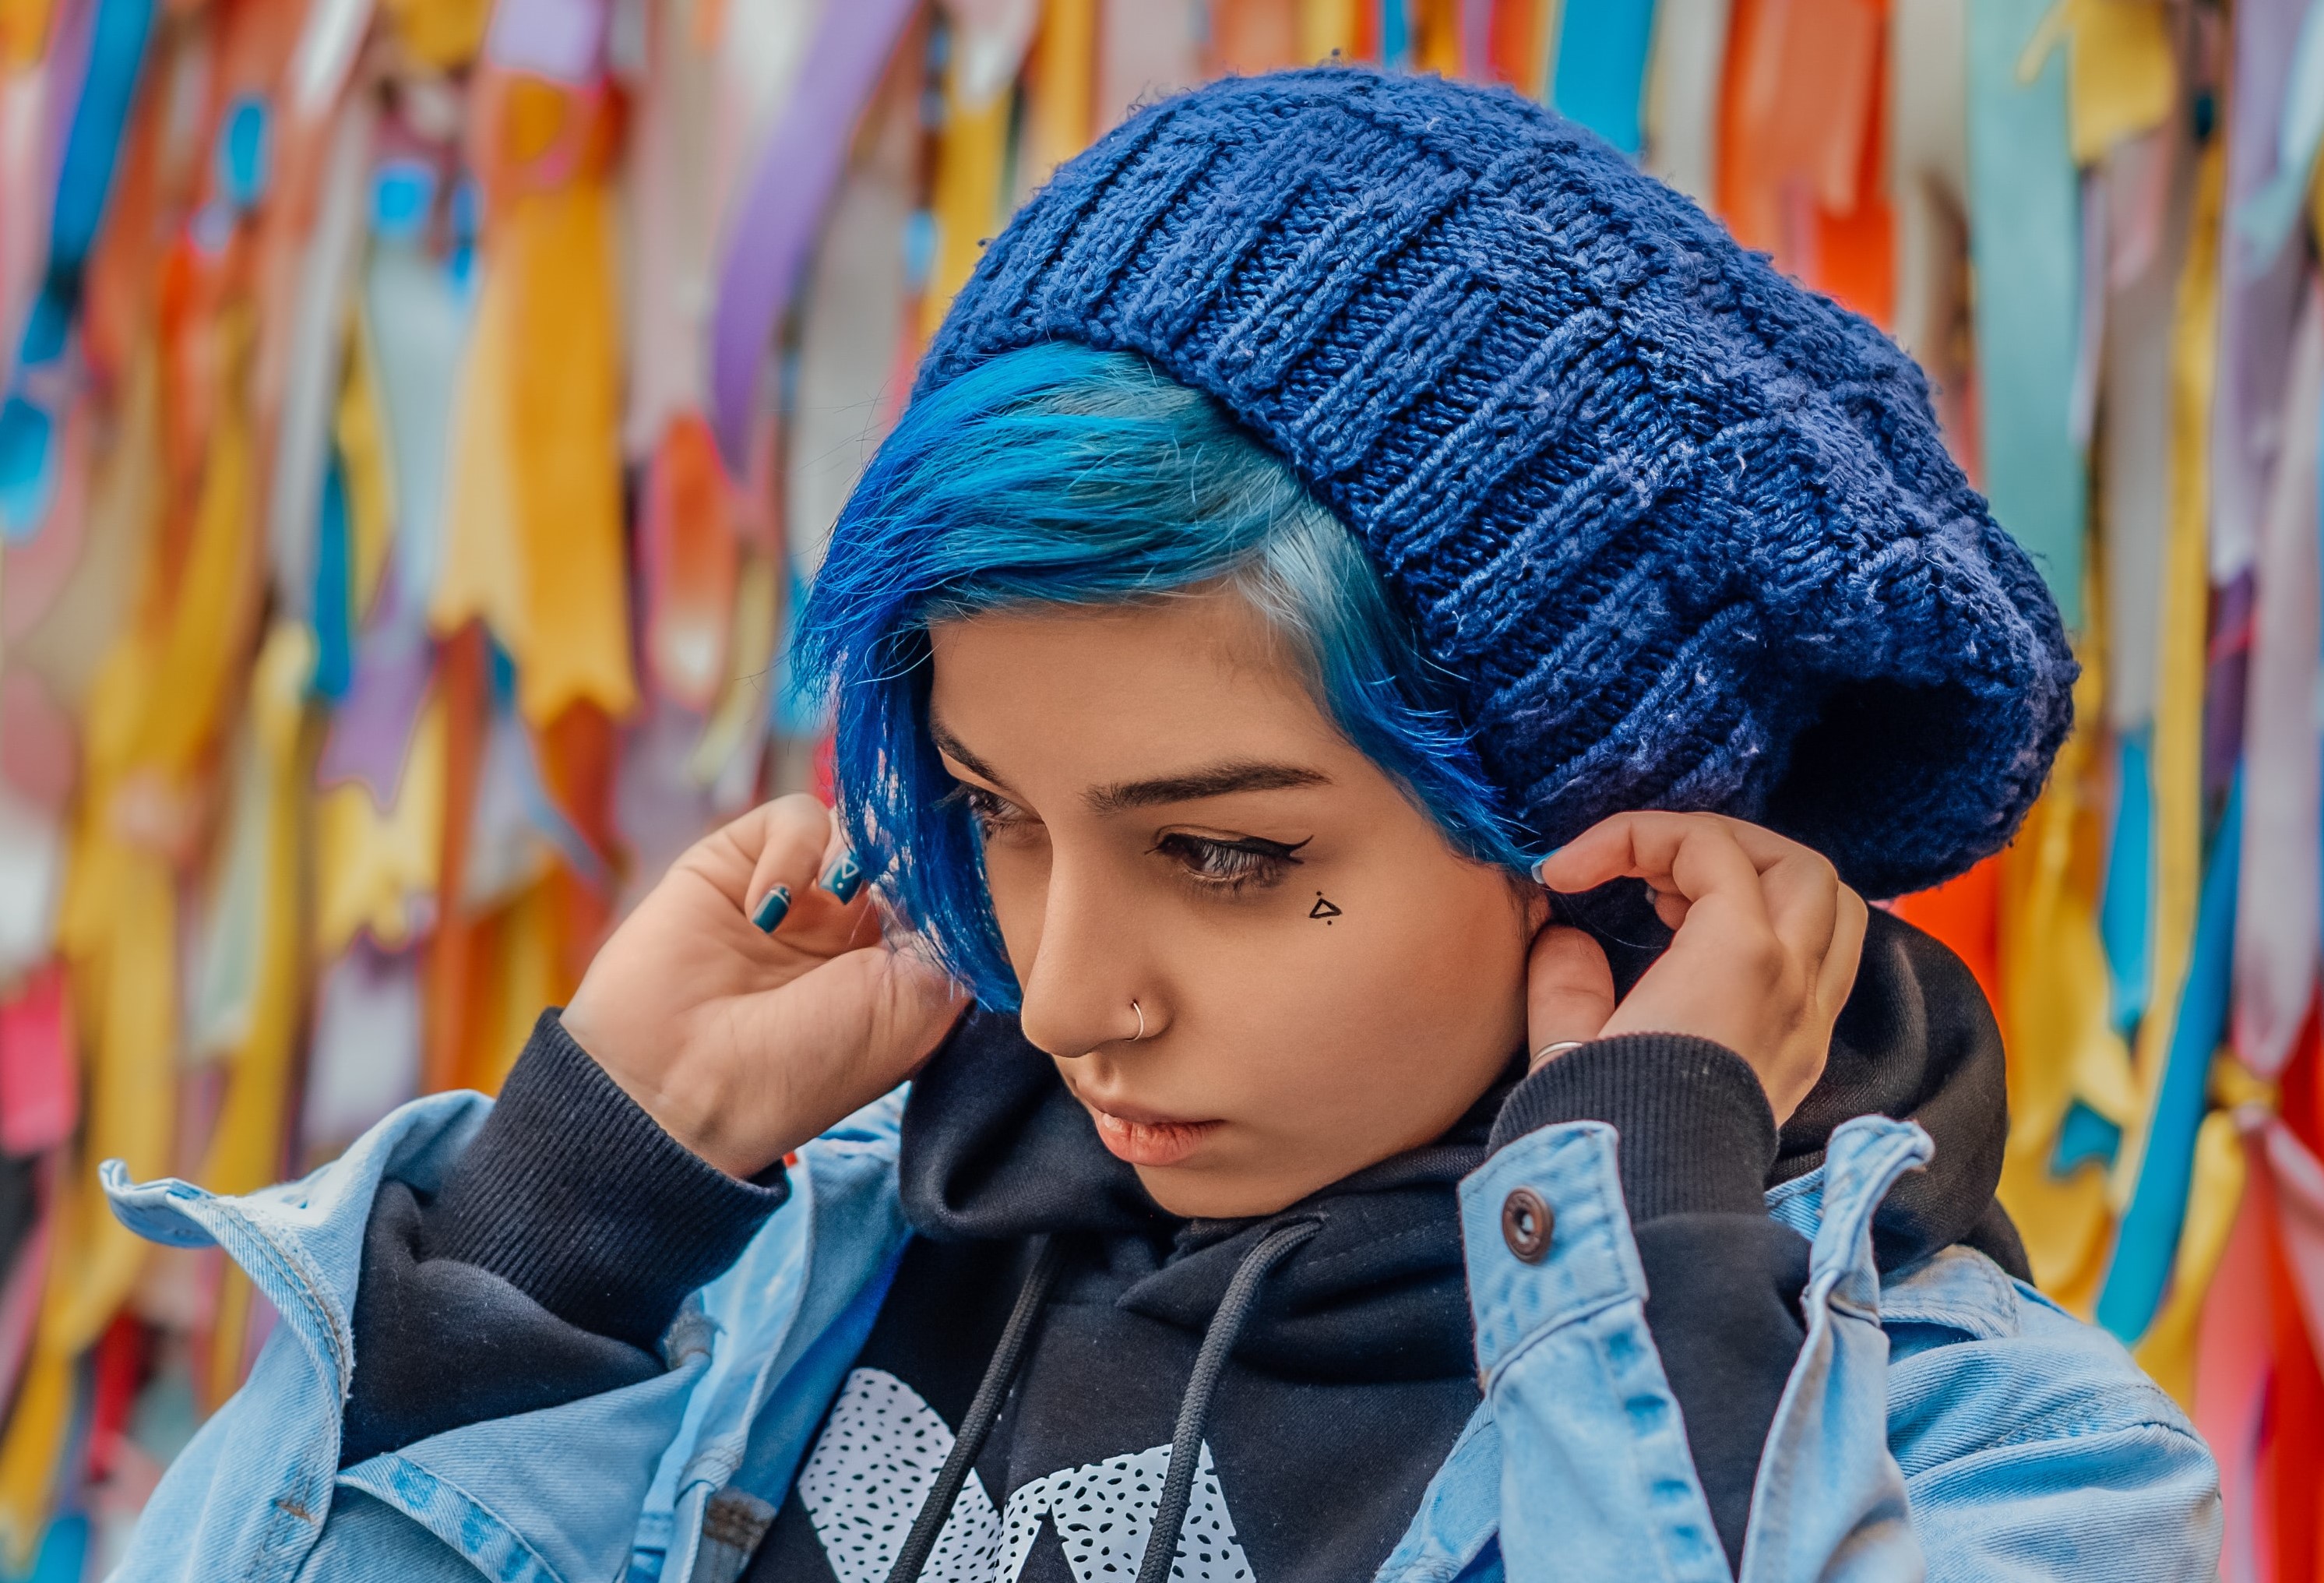 A woman with blue hair. | Source: Unsplash